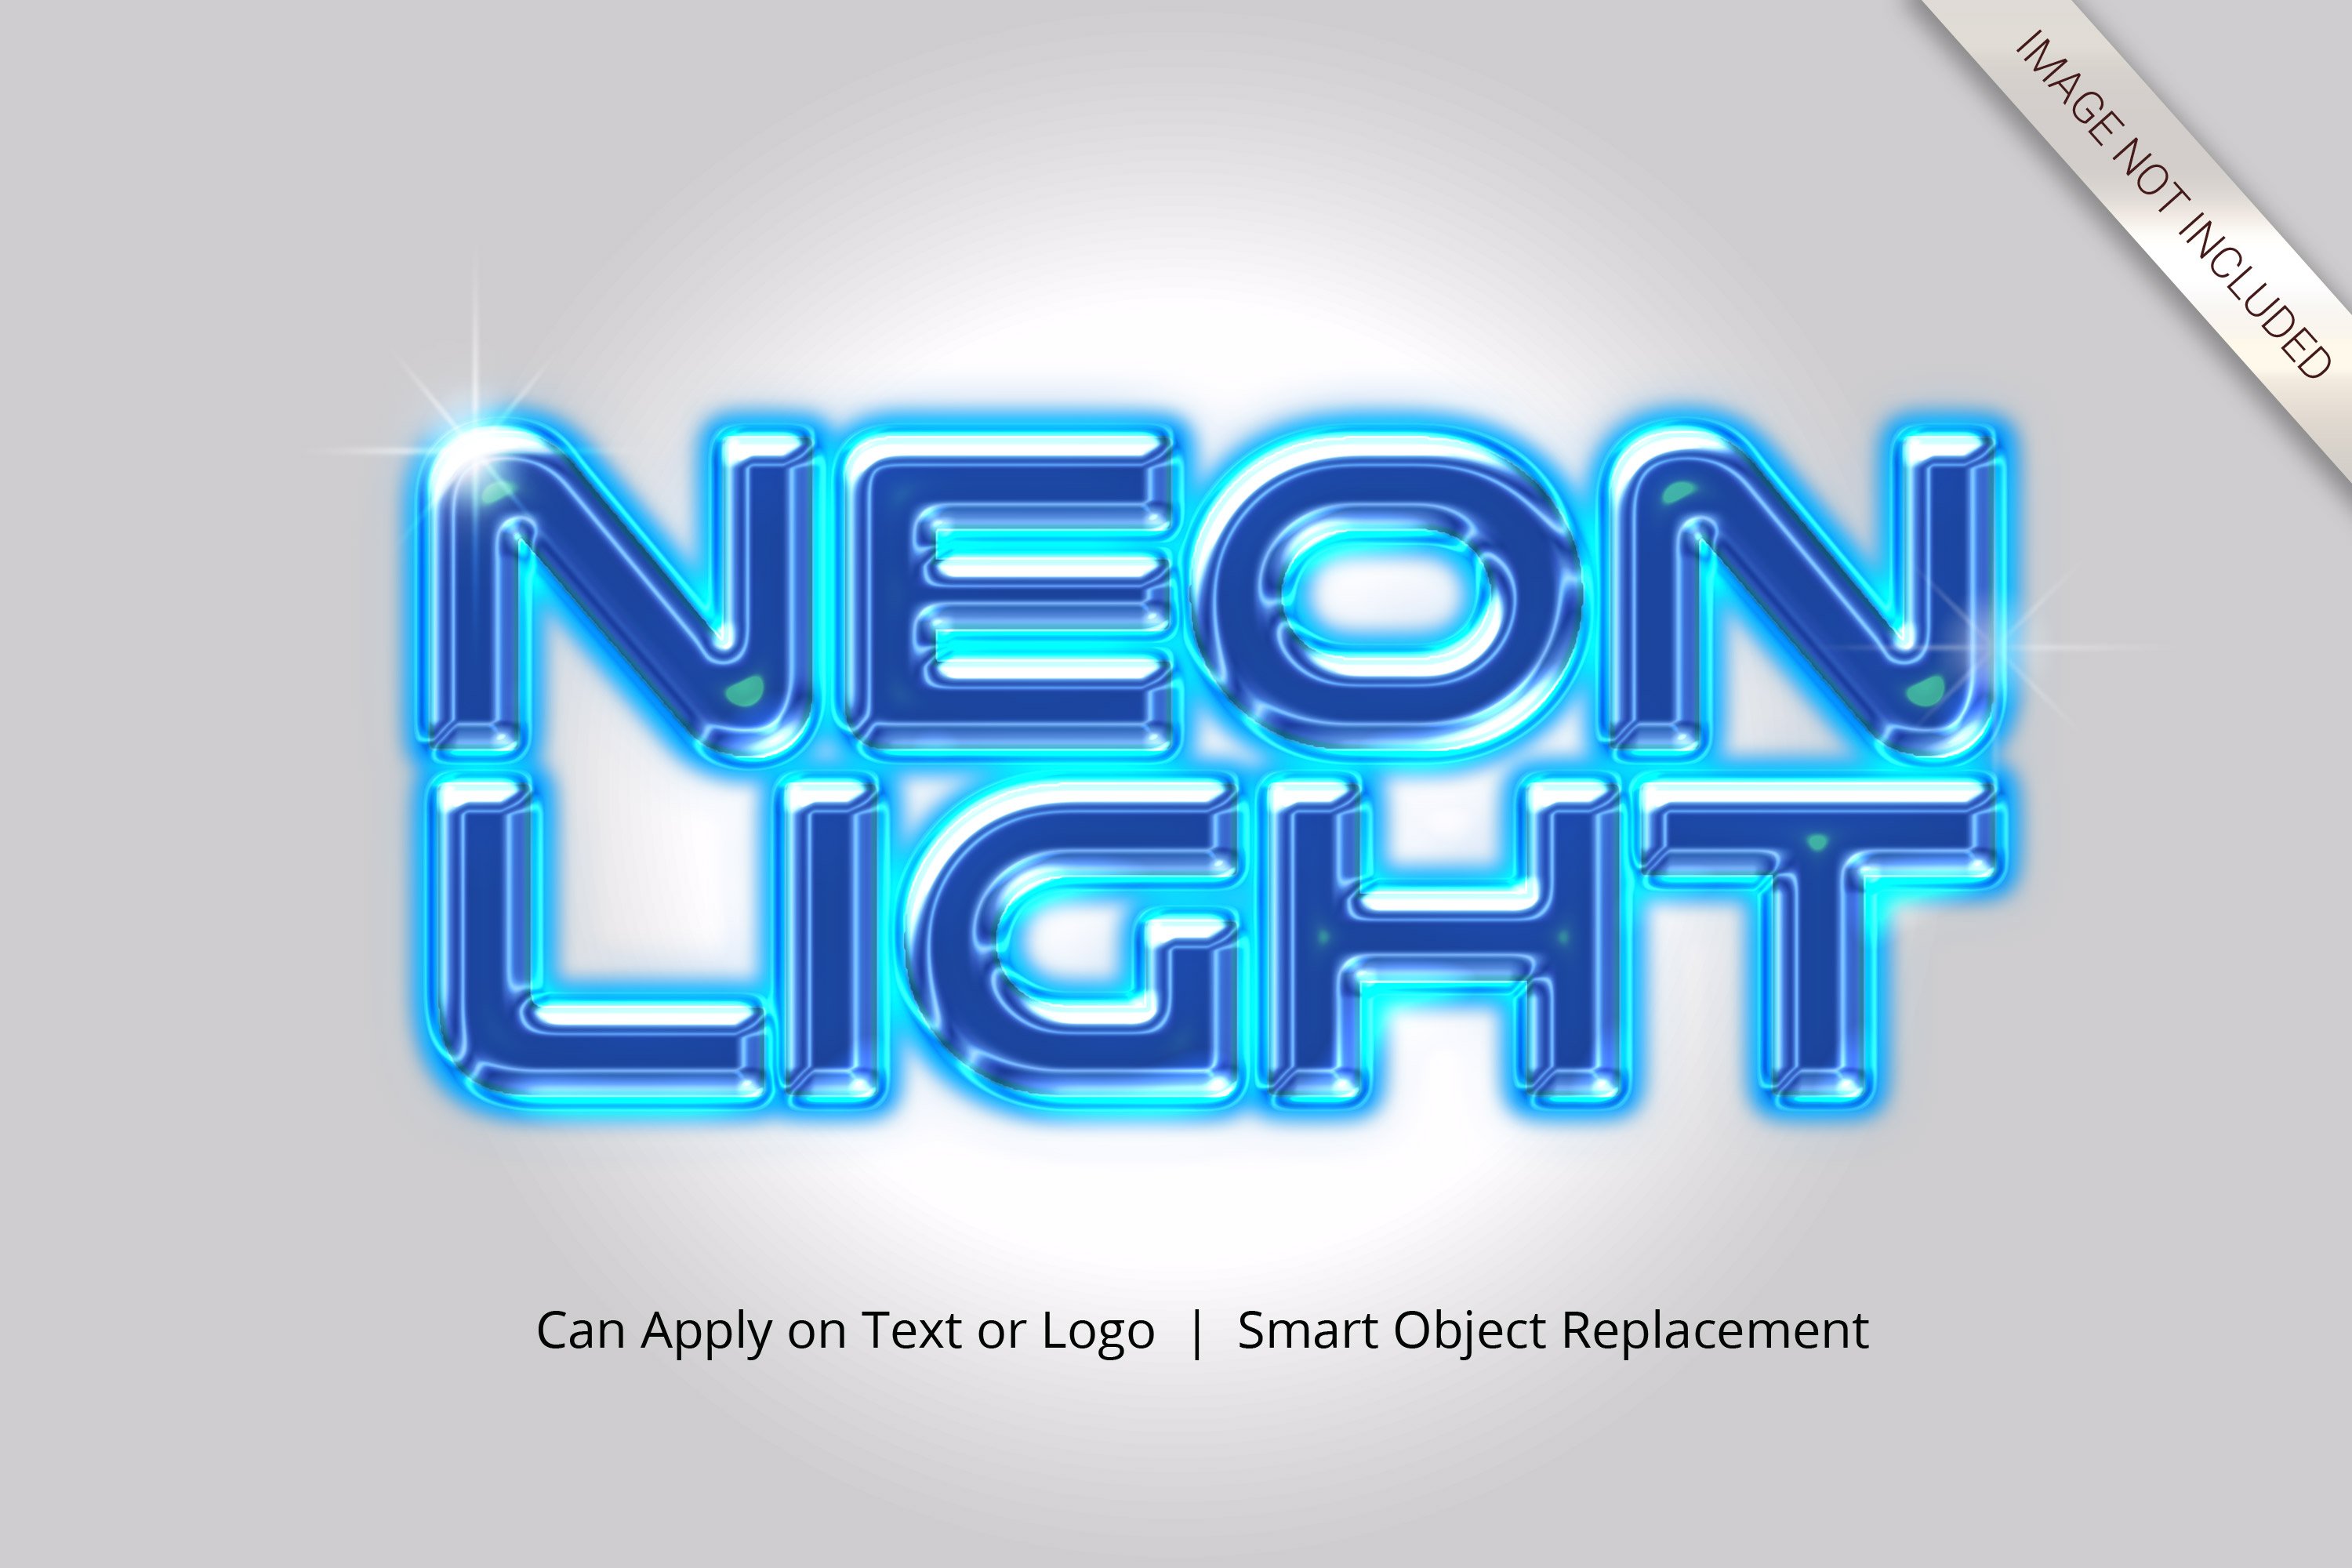 Realistic Neon 3D Text Effect Stylecover image.